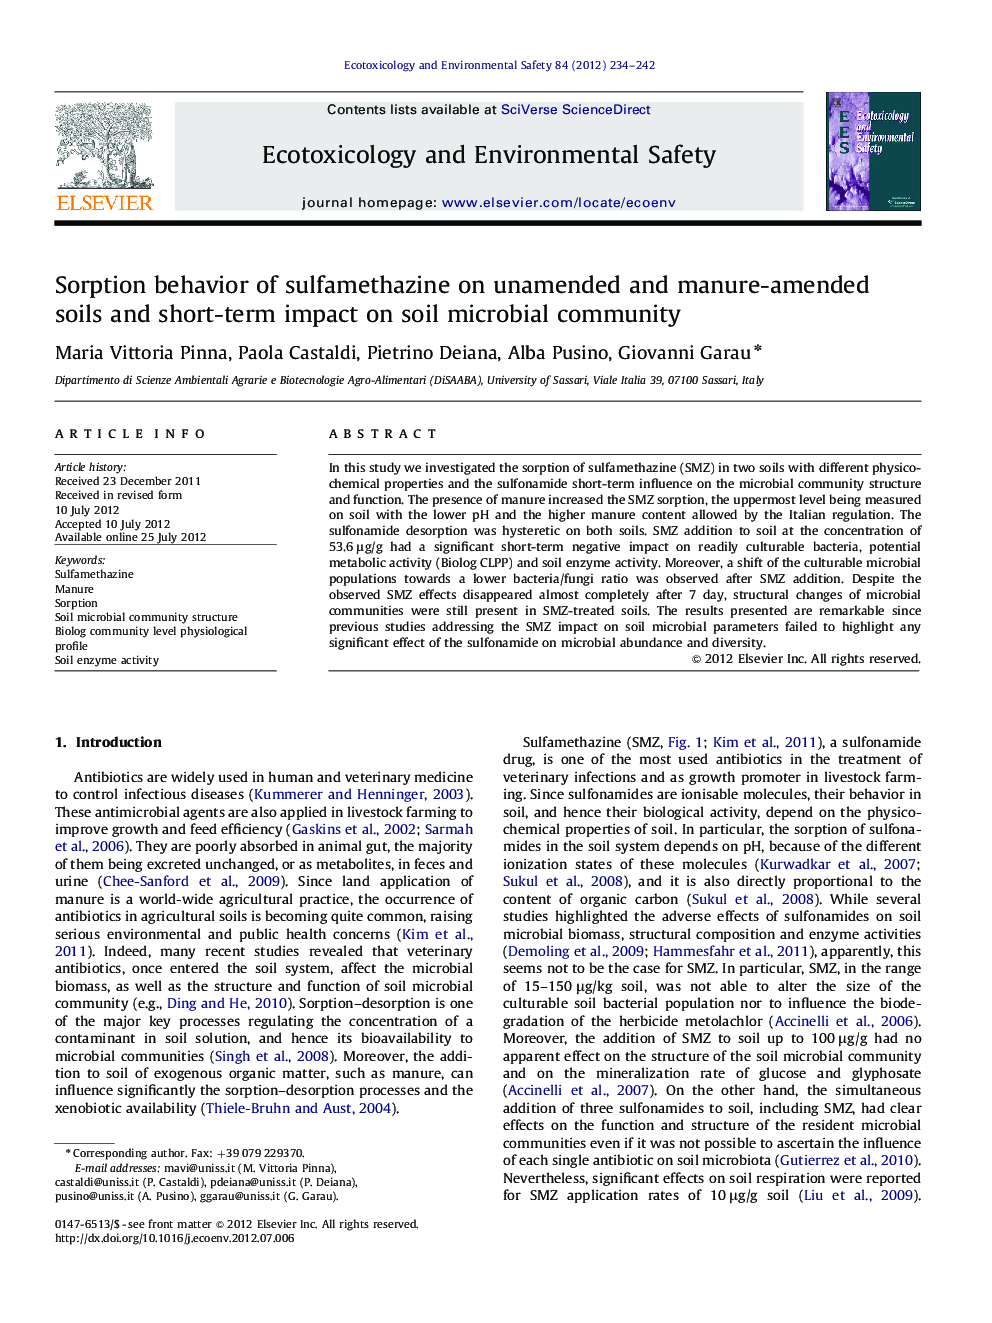 Sorption behavior of sulfamethazine on unamended and manure-amended soils and short-term impact on soil microbial community